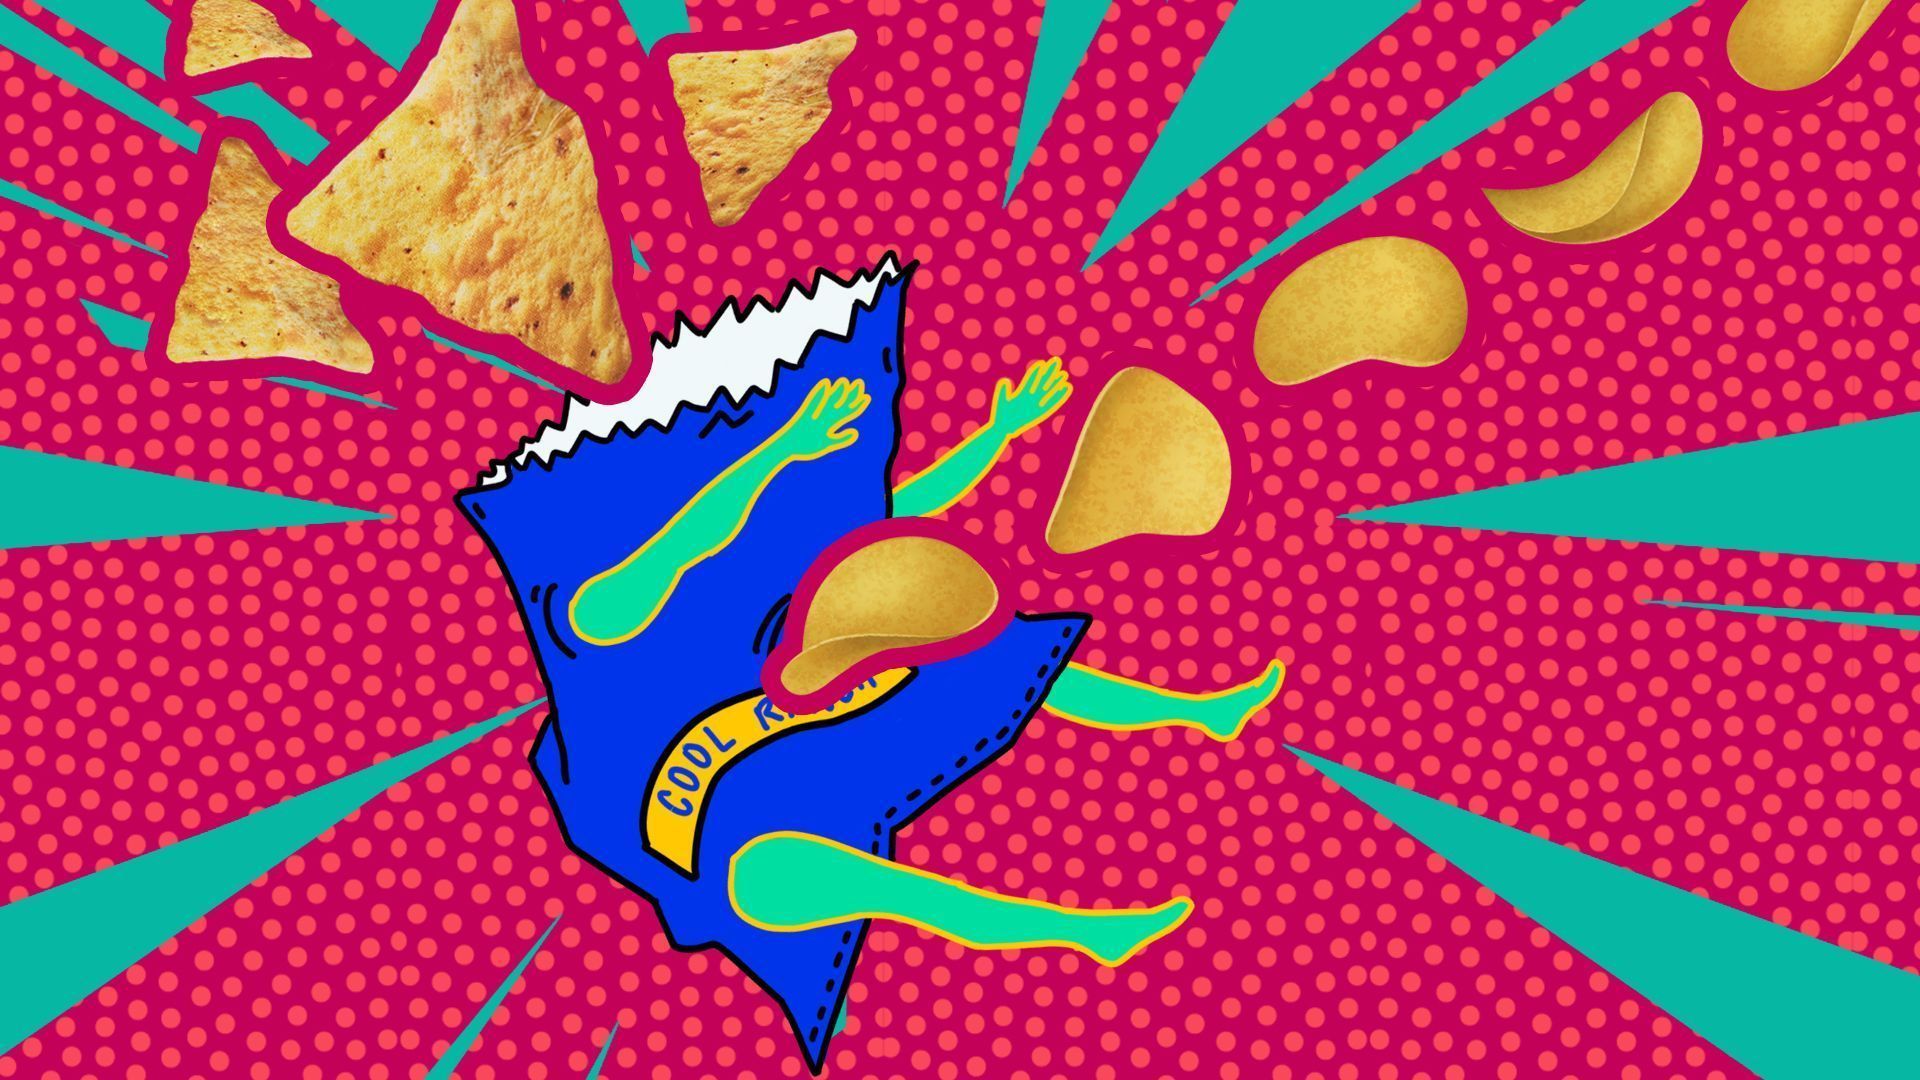 A bag of chips falling on a pink background - Doritos